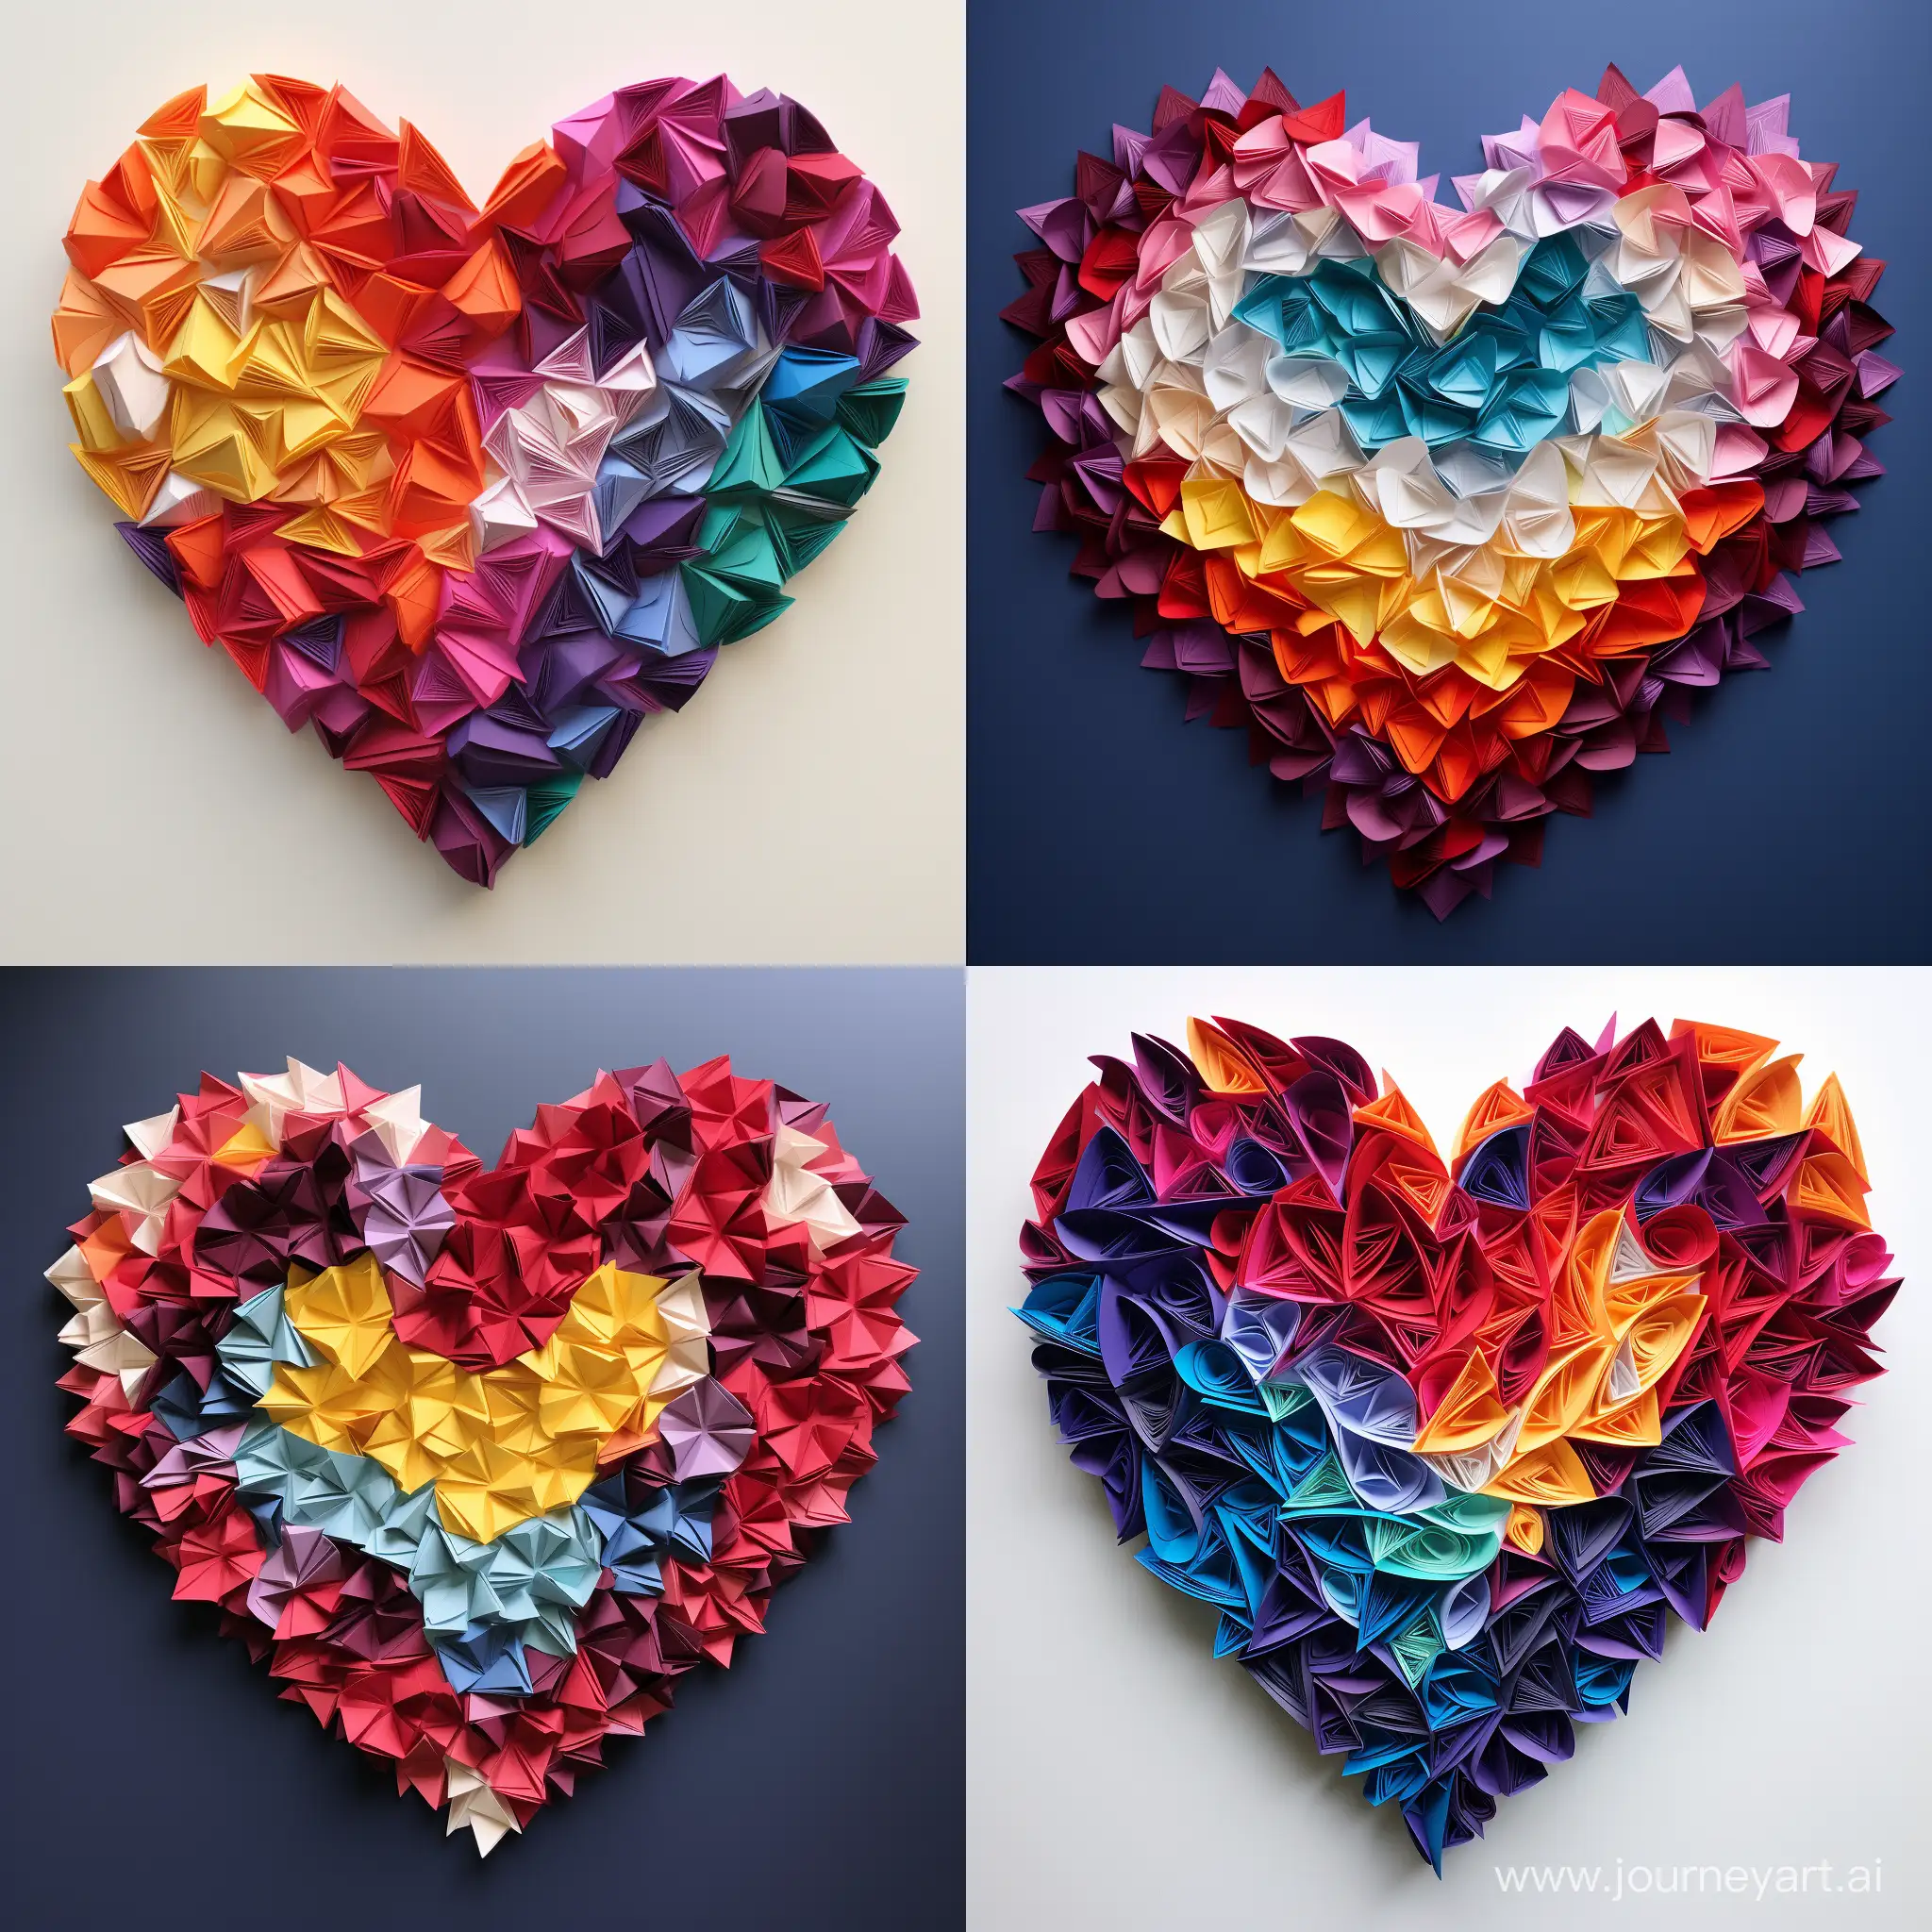 Vibrant-Origami-Heart-Craft-Colorful-Paper-Artistry